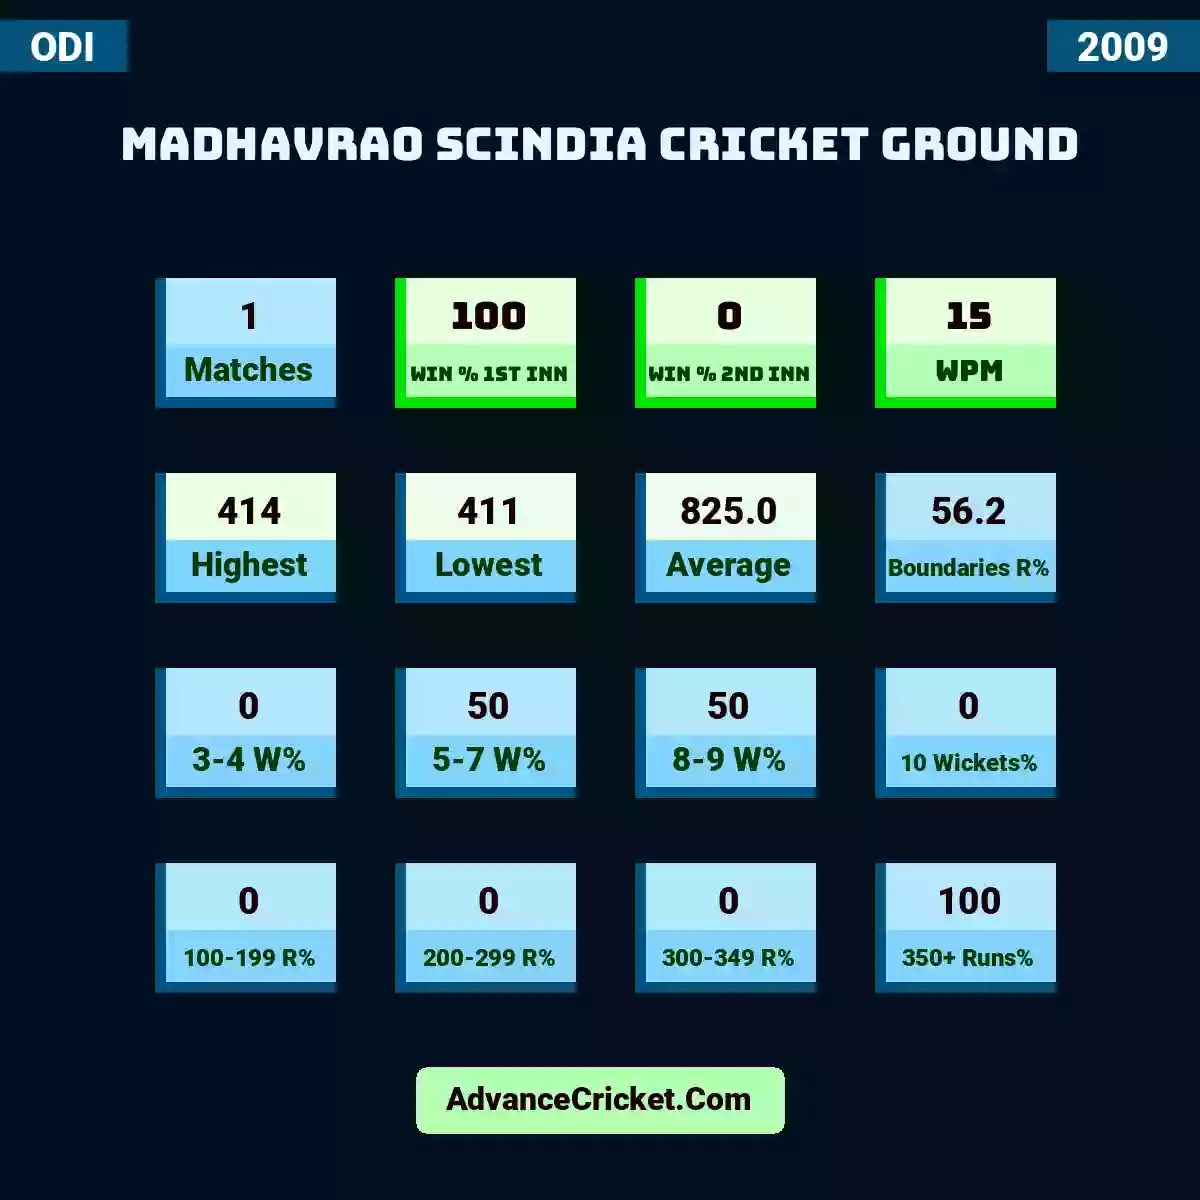 Image showing Madhavrao Scindia Cricket Ground with Matches: 1, Win % 1st Inn: 100, Win % 2nd Inn: 0, WPM: 15, Highest: 414, Lowest: 411, Average: 825.0, Boundaries R%: 56.2, 3-4 W%: 0, 5-7 W%: 50, 8-9 W%: 50, 10 Wickets%: 0, 100-199 R%: 0, 200-299 R%: 0, 300-349 R%: 0, 350+ Runs%: 100.